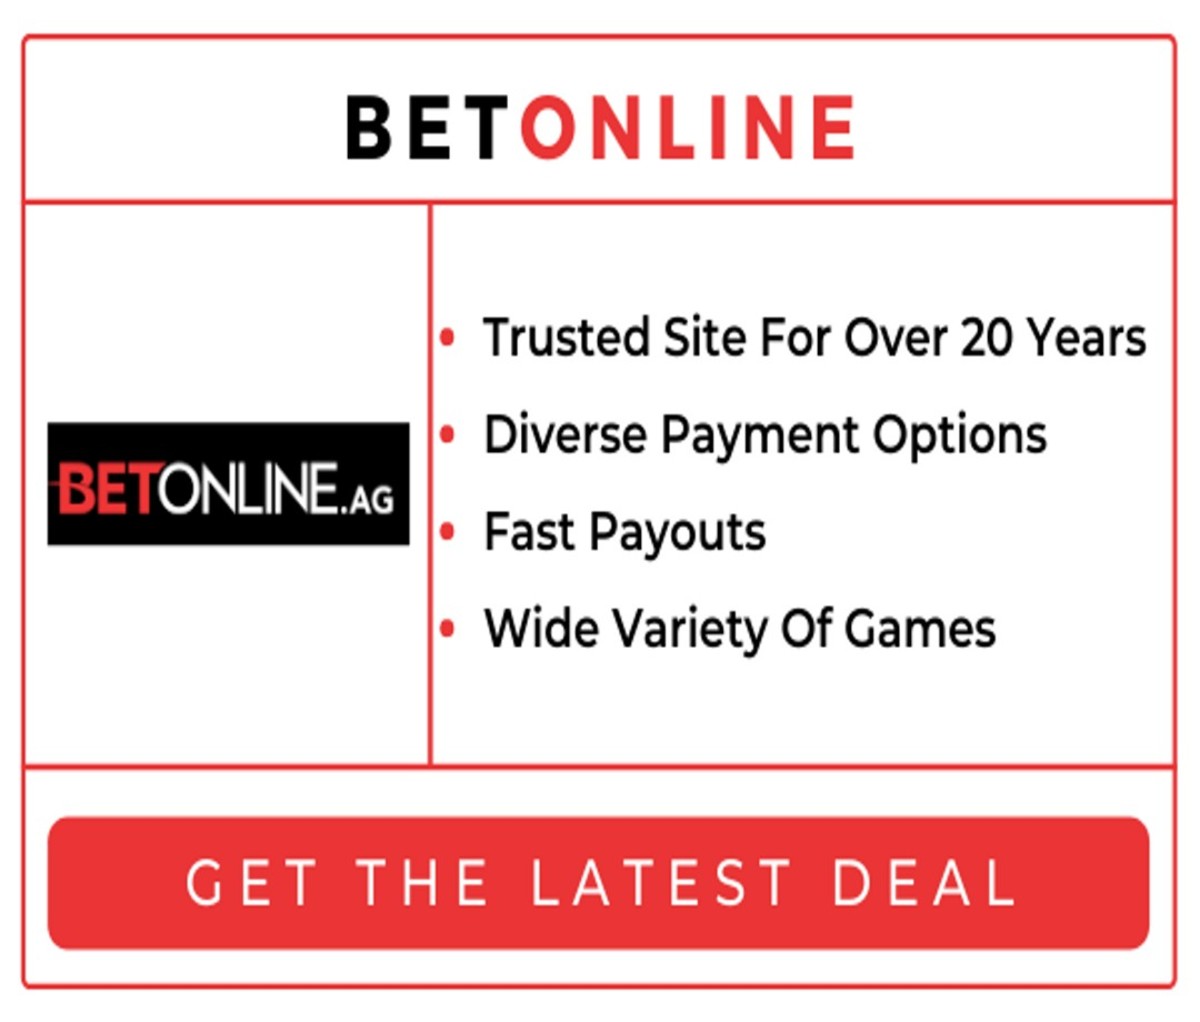 BetOnline - Popular Site For Quick Payouts 